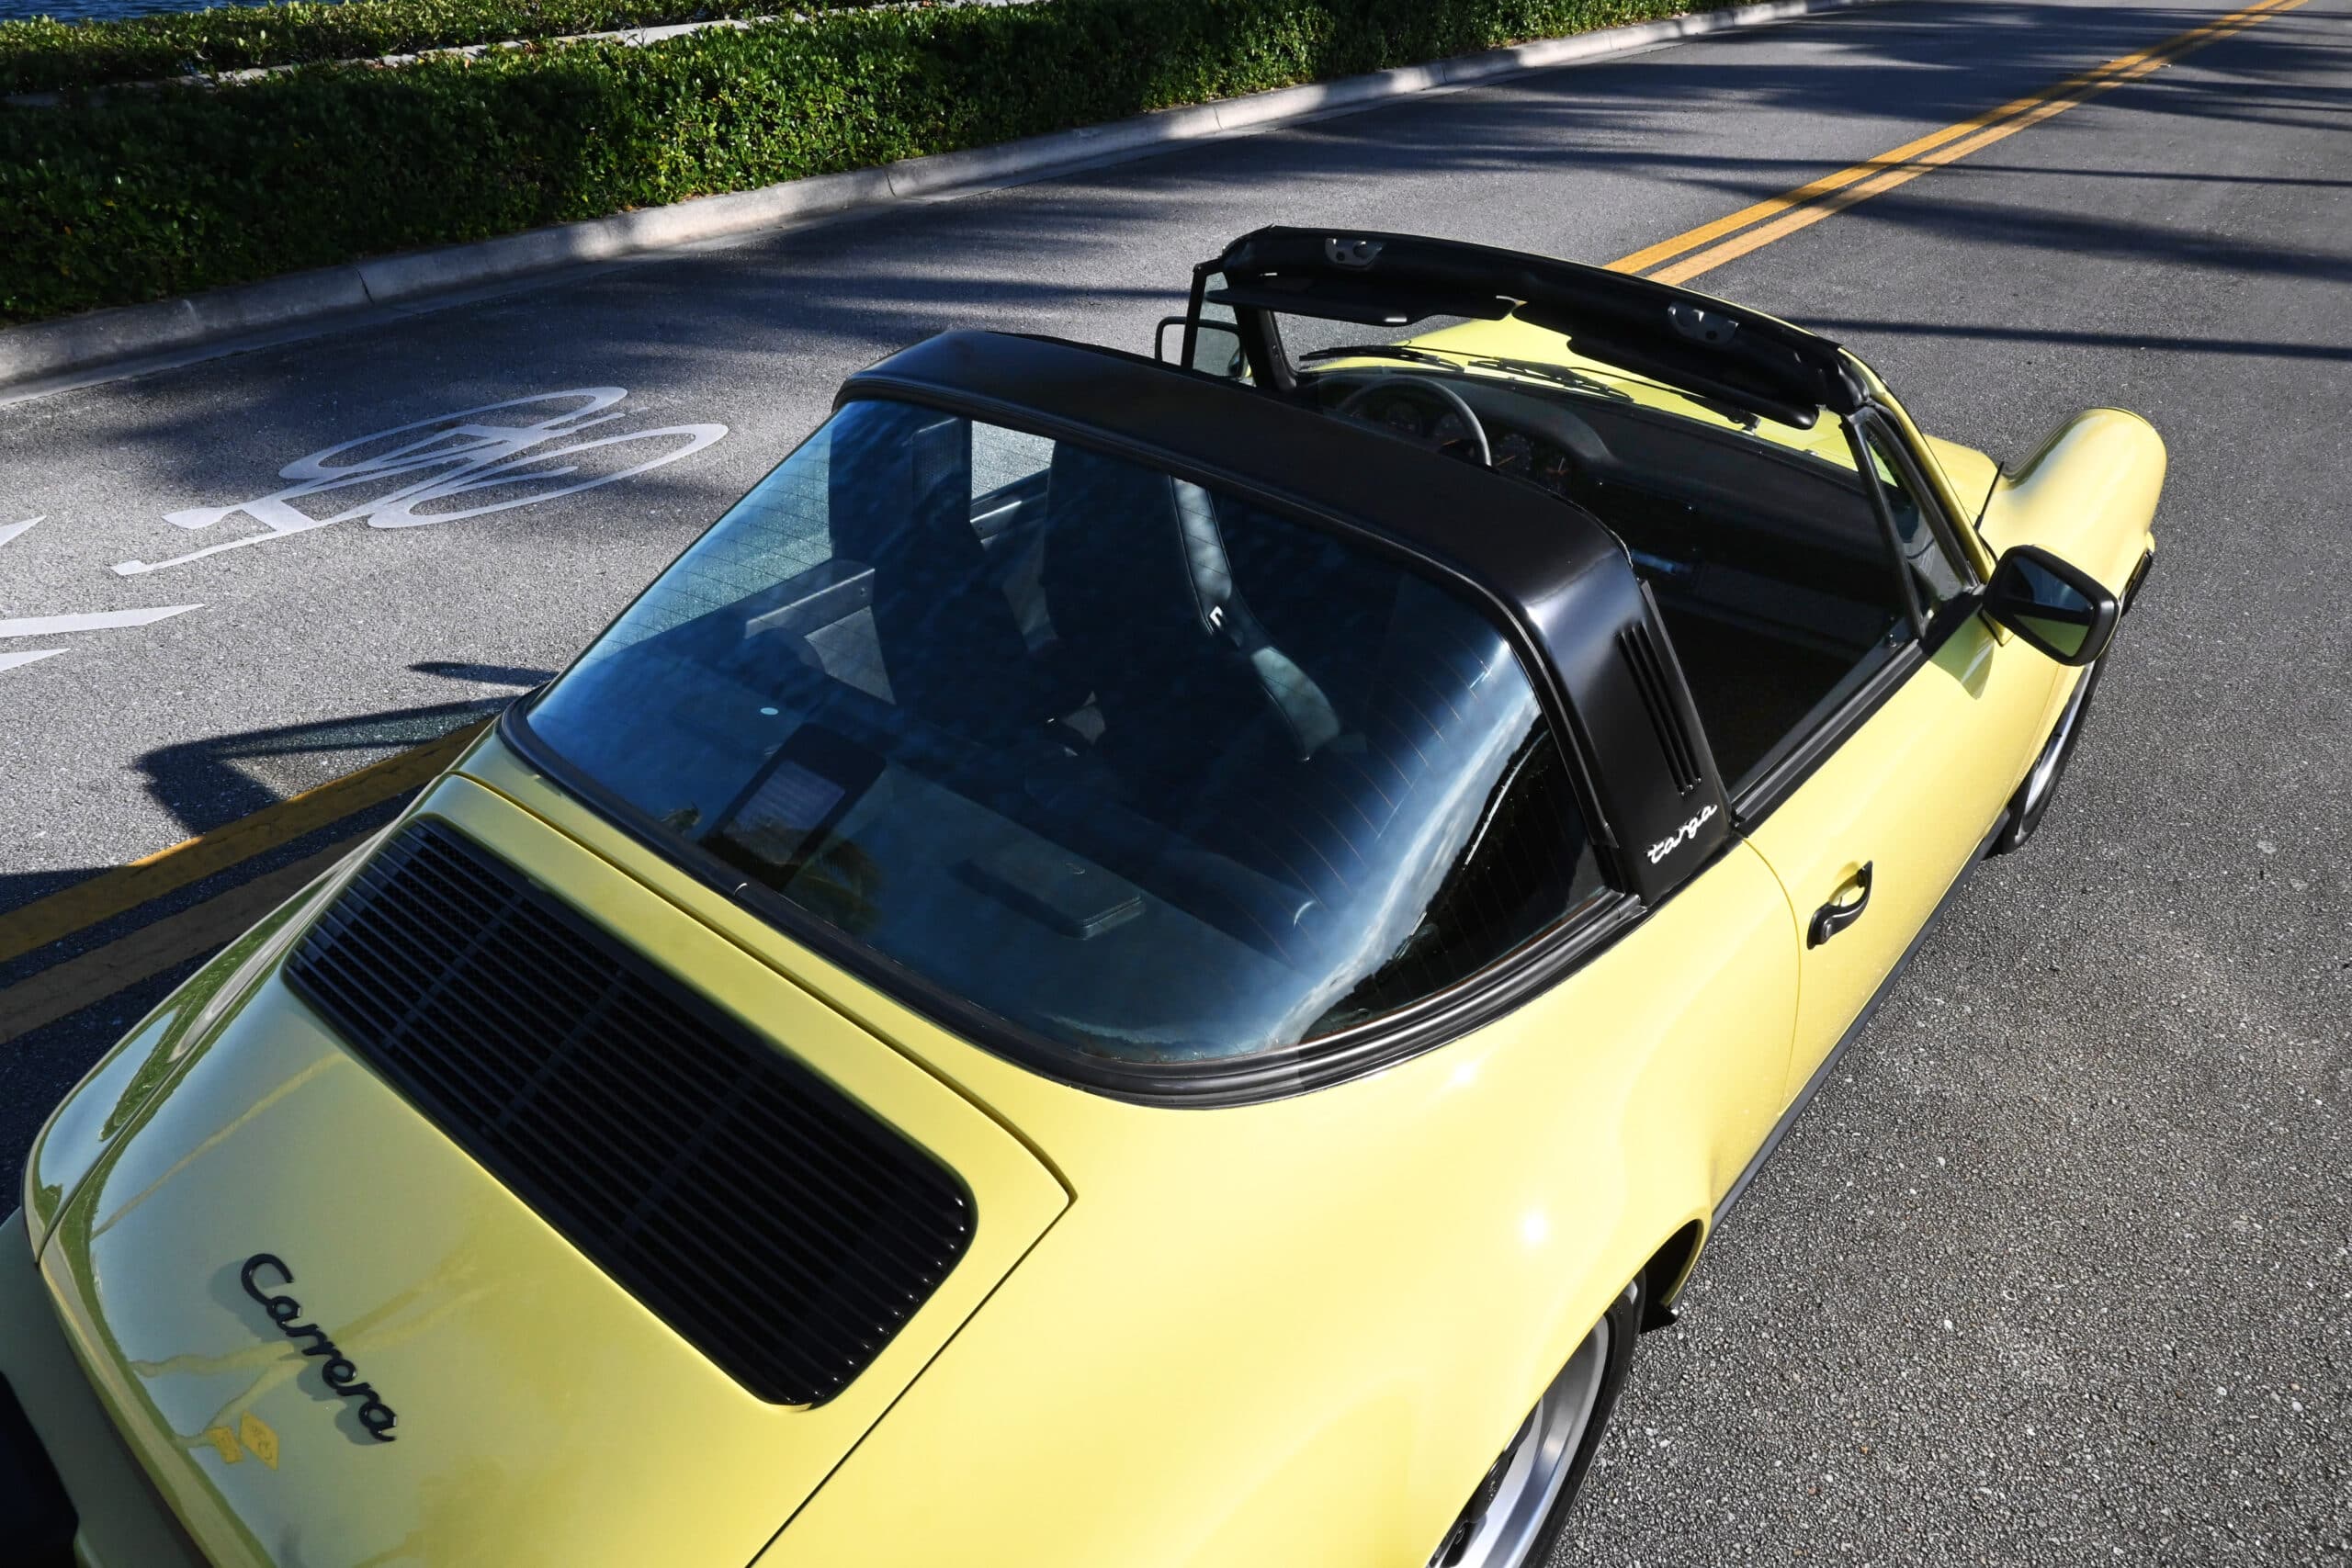 1987 Porsche 911 Carrera Targa G50 Transmission, Rare Lime Yellow, loaded with factory options